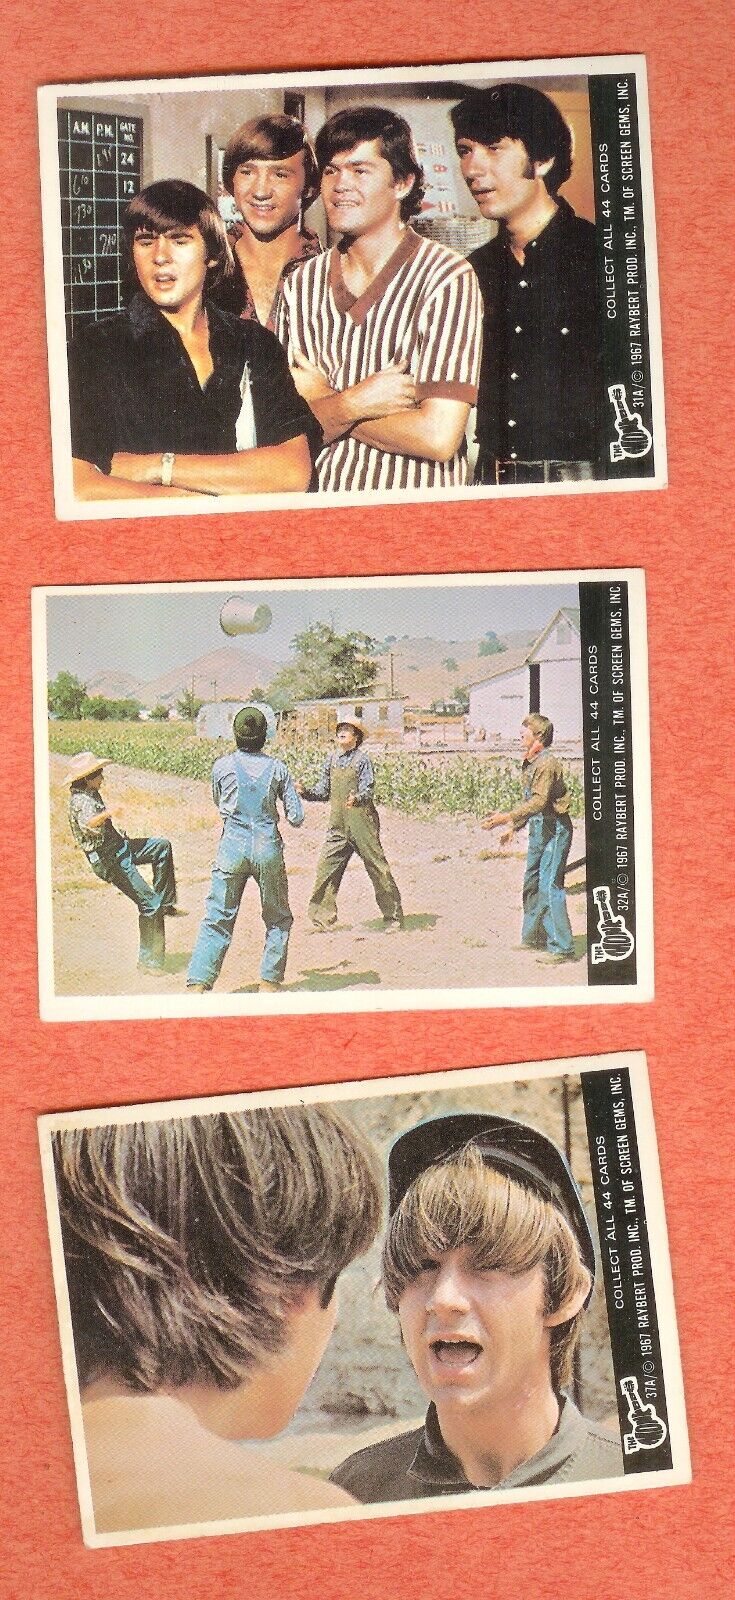 3 - 1967 Series A Monkees # 31A, 32A, 37A  NO creases or wrinkles